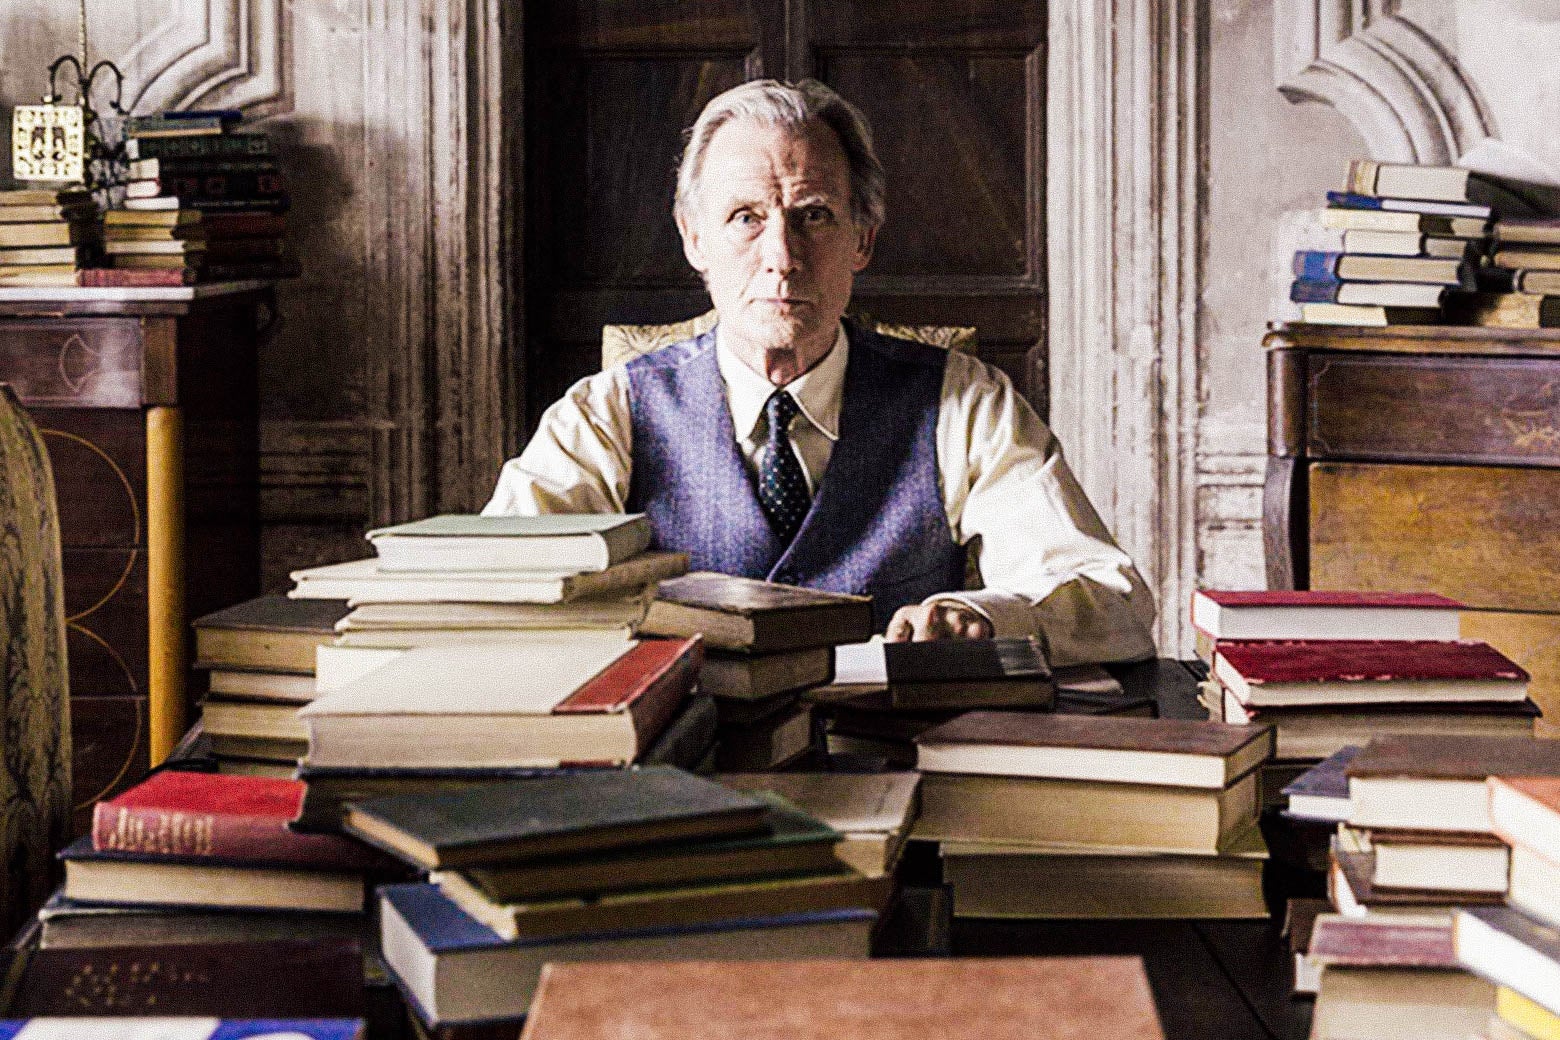 In a still from The Bookshop, Mr. Brundish (Bill Nighy) sits at a desk covered in and surrounded by books.